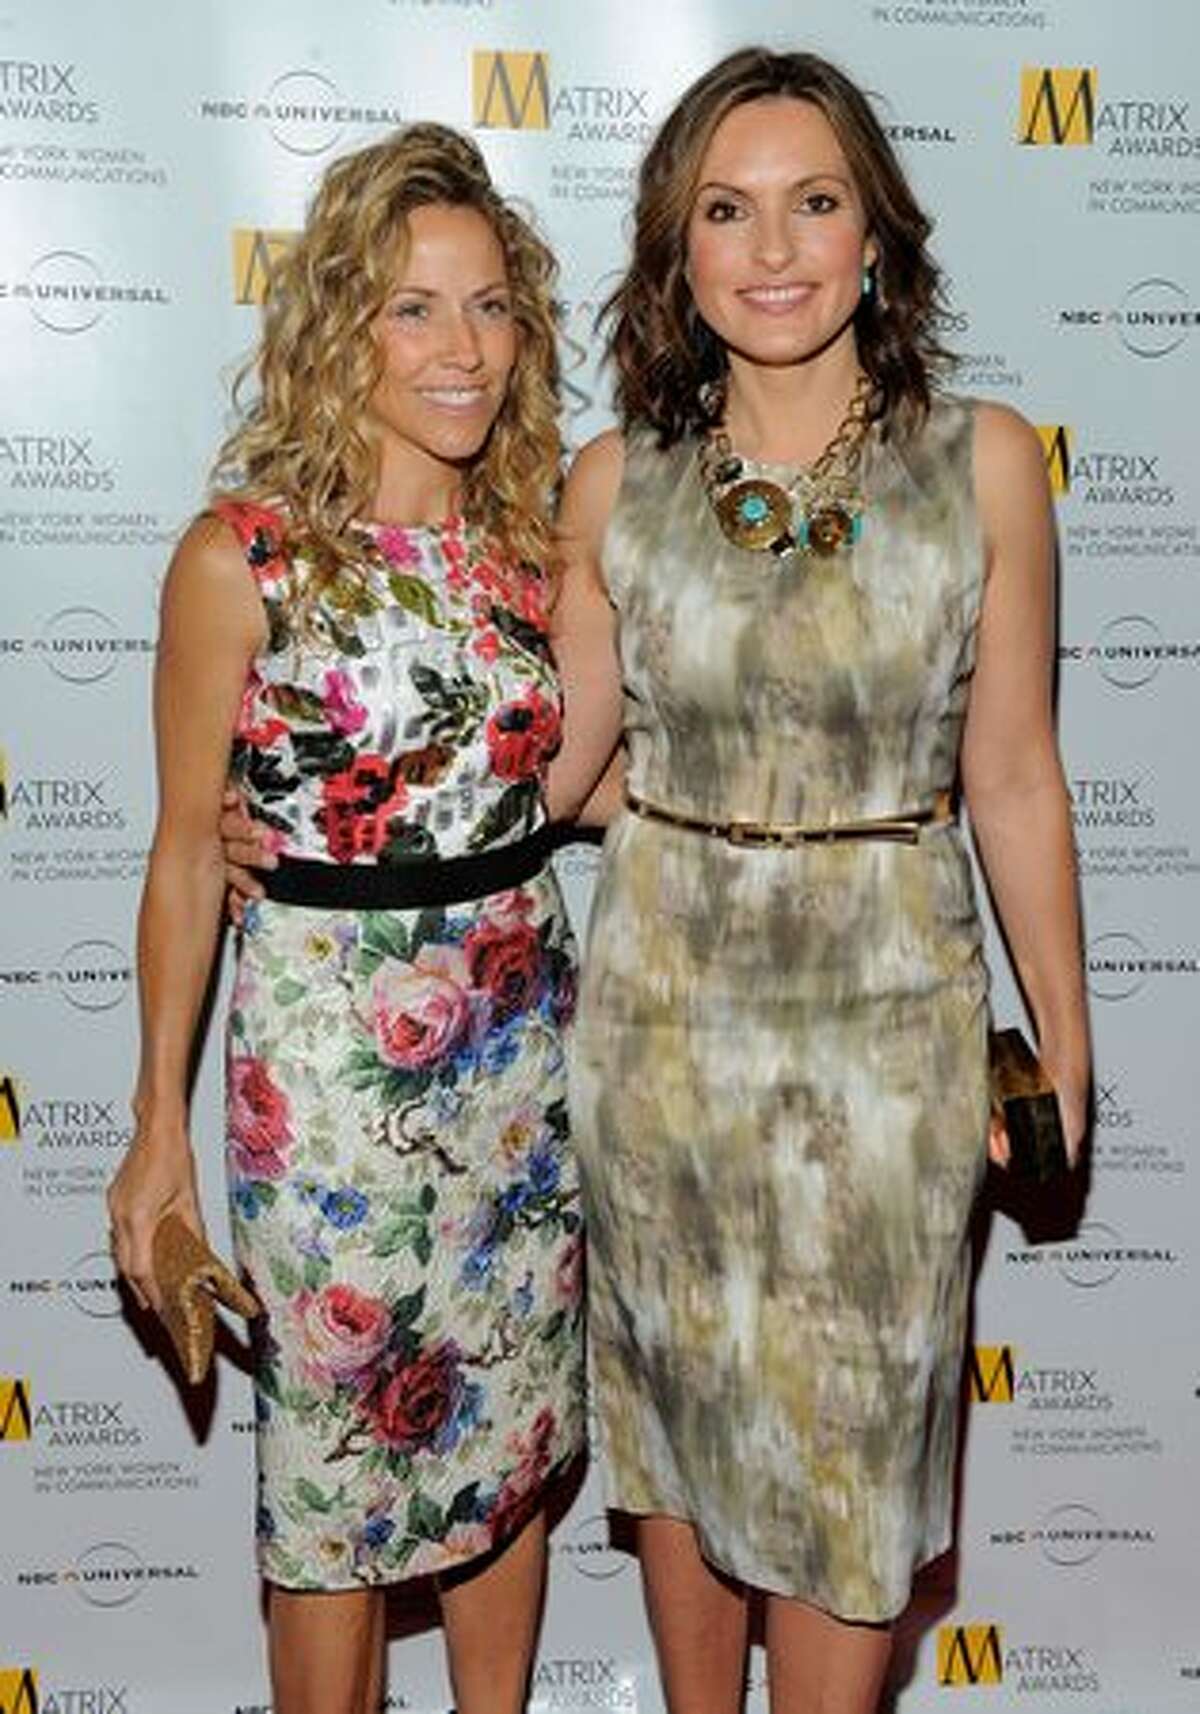 Singer Sheryl Crow and actress Mariska Hargitay pose for photos at the 2010 Matrix Awards presented by New York Women in Communications at The Waldorf Astoria in New York City.